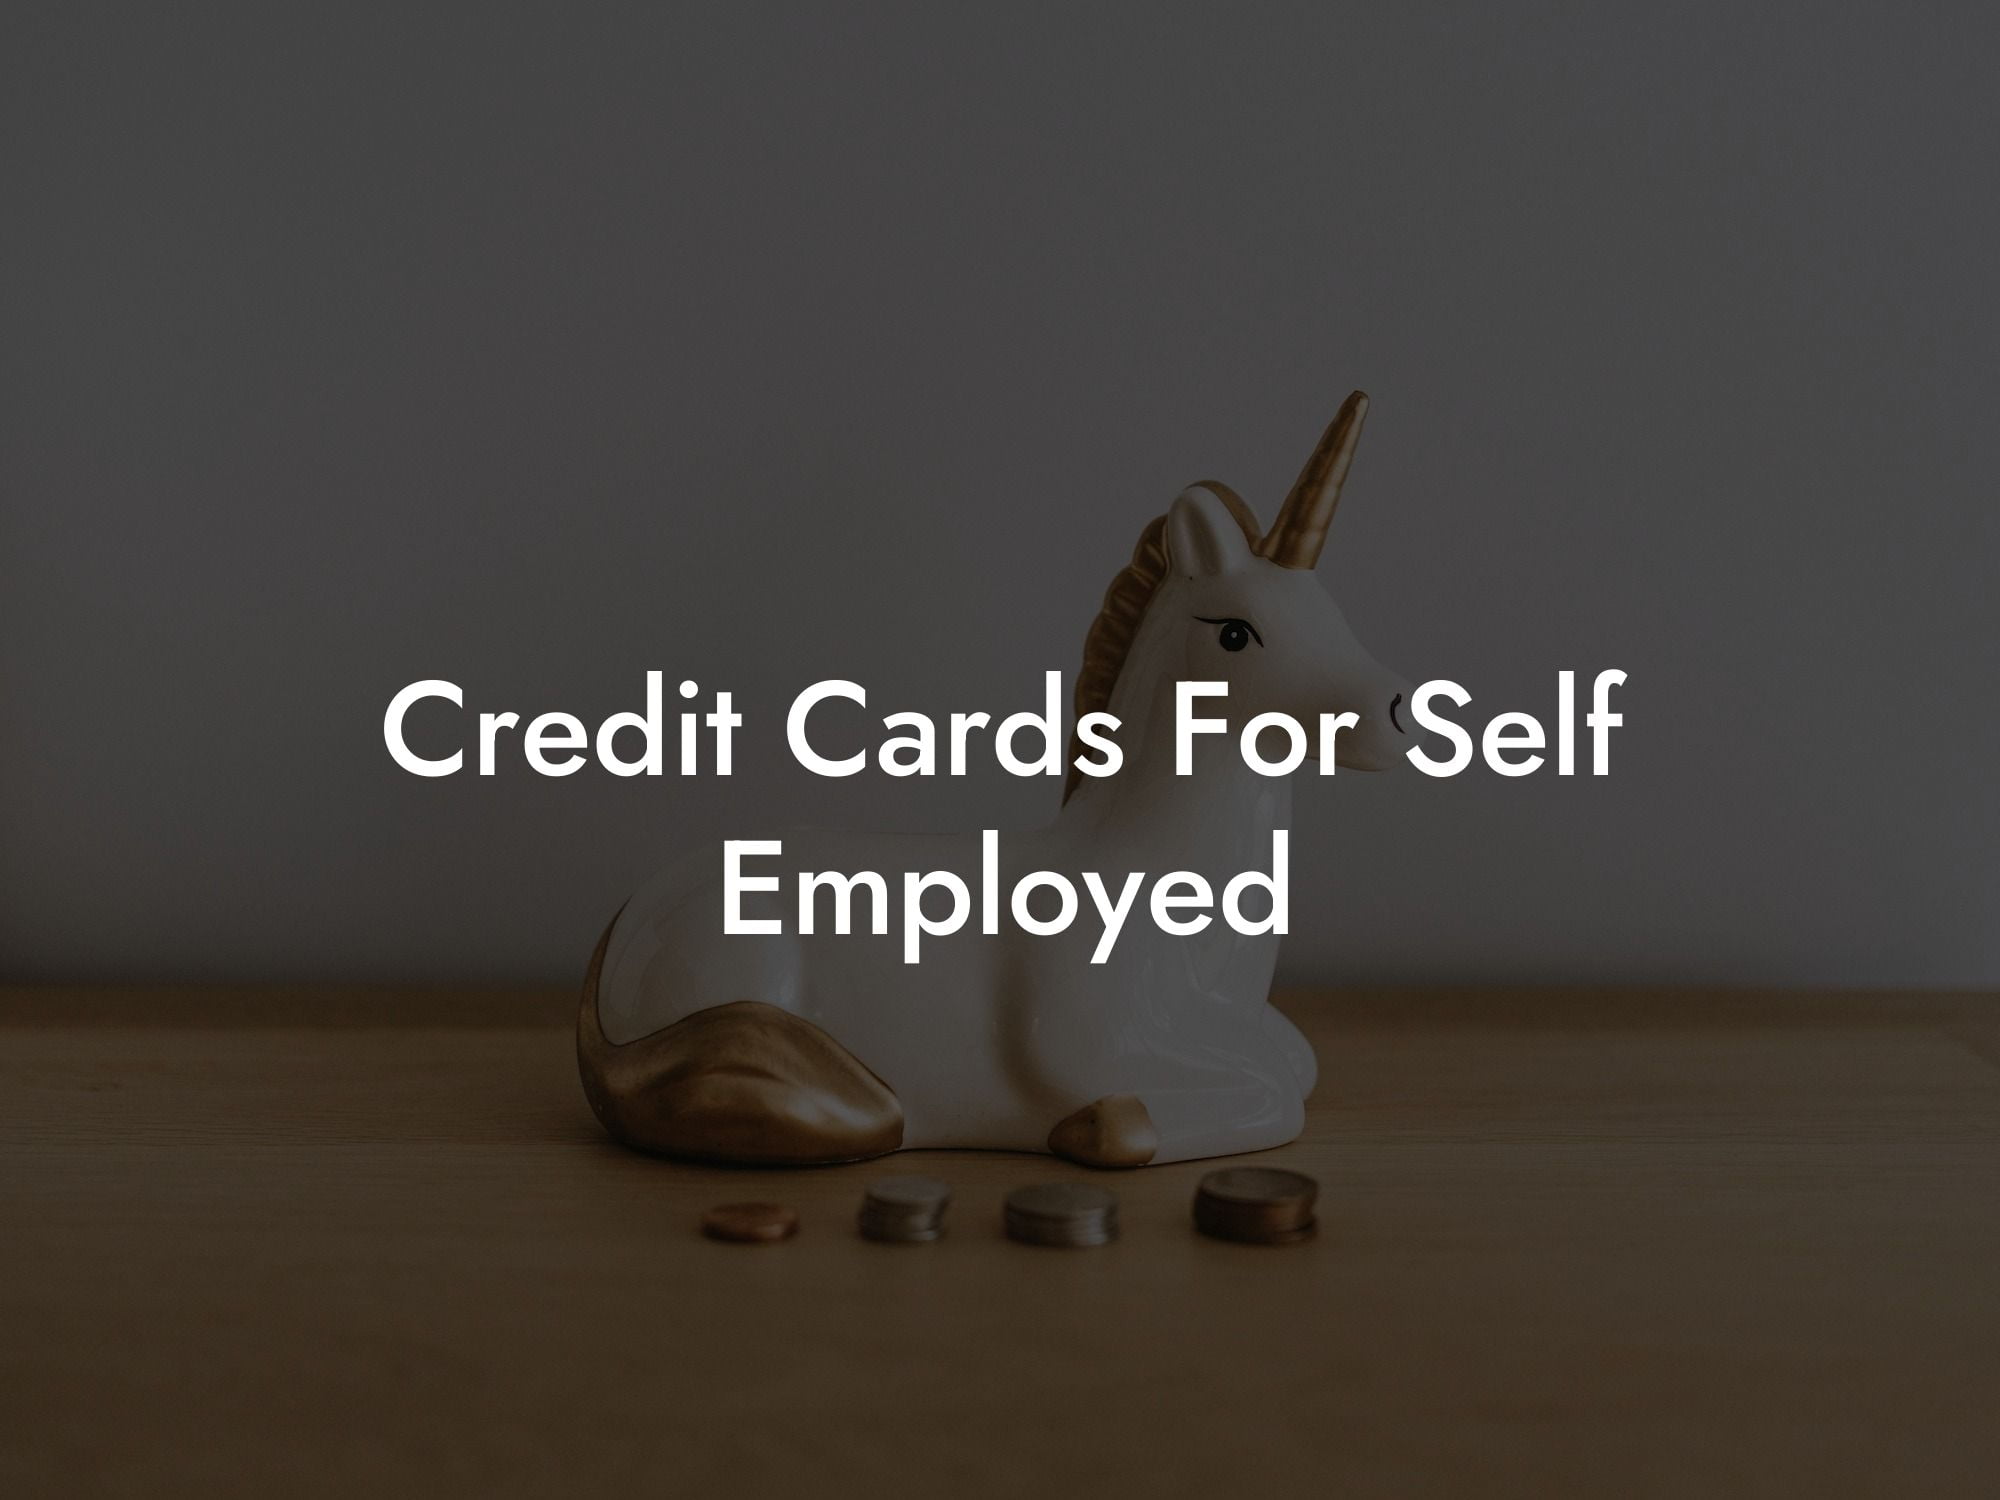 Credit Cards For Self Employed